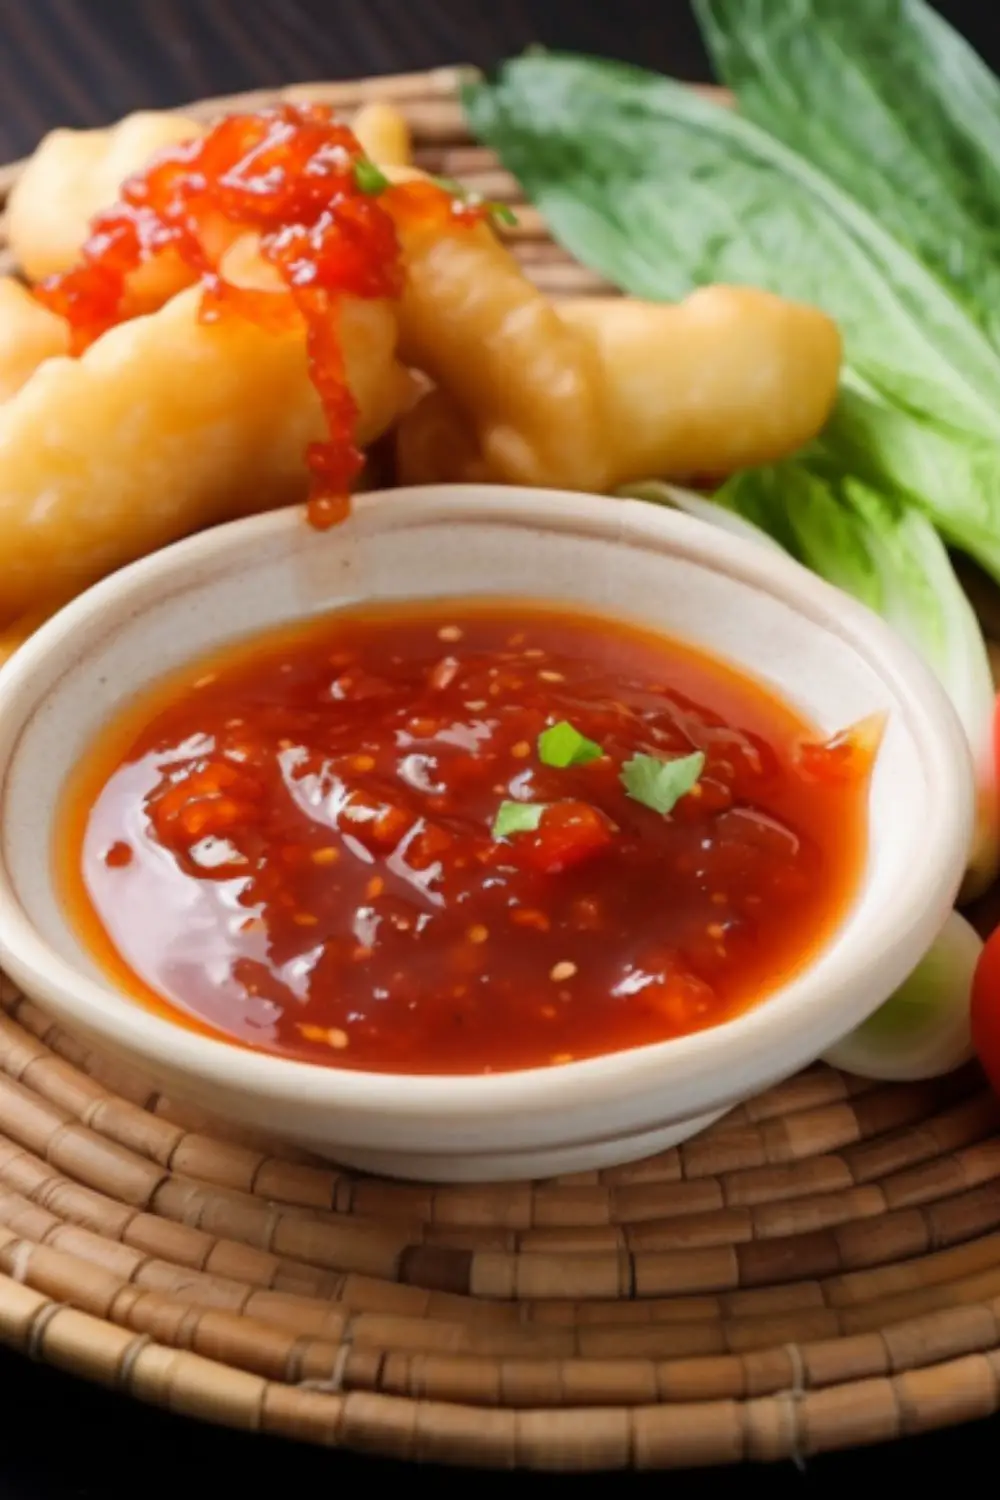 la choy sweet and sour sauce recipe